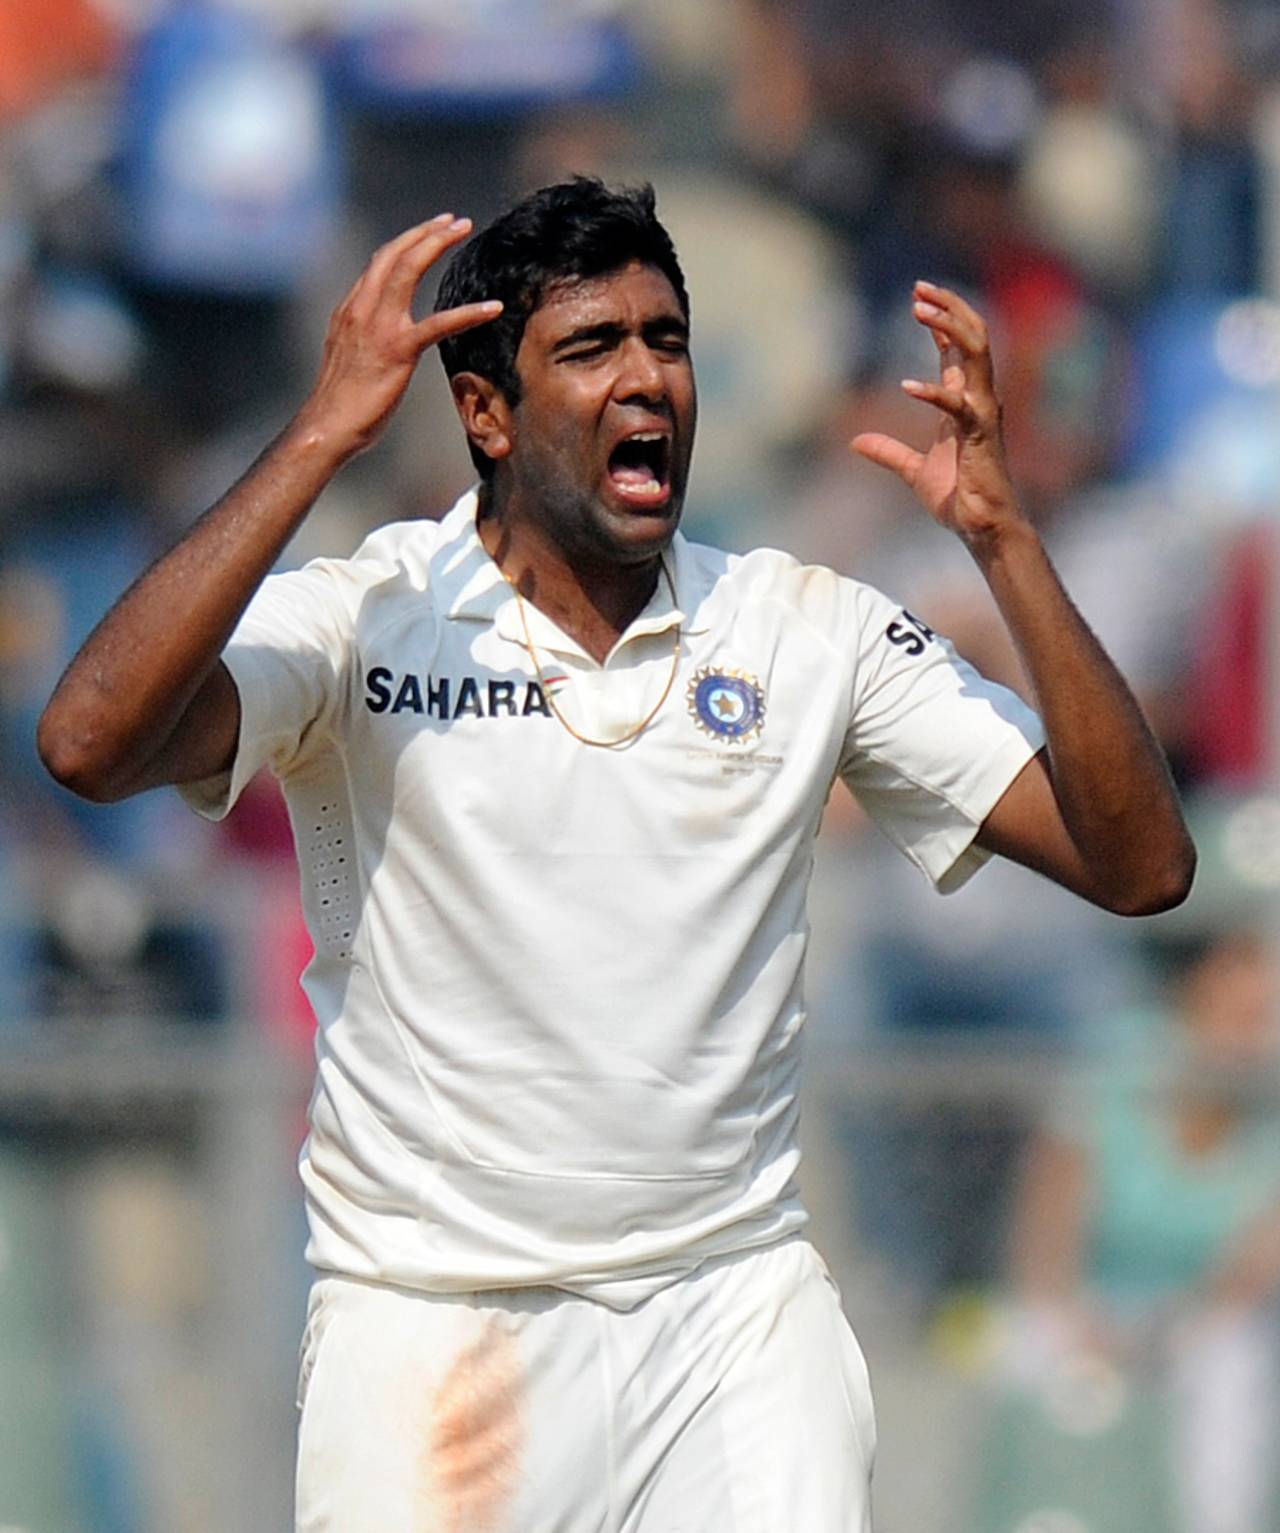 R Ashwin reacts to M Vijay dropping a catch off his bowling, India v West Indies, 2nd Test, Mumbai, 1st day, November 14, 2013